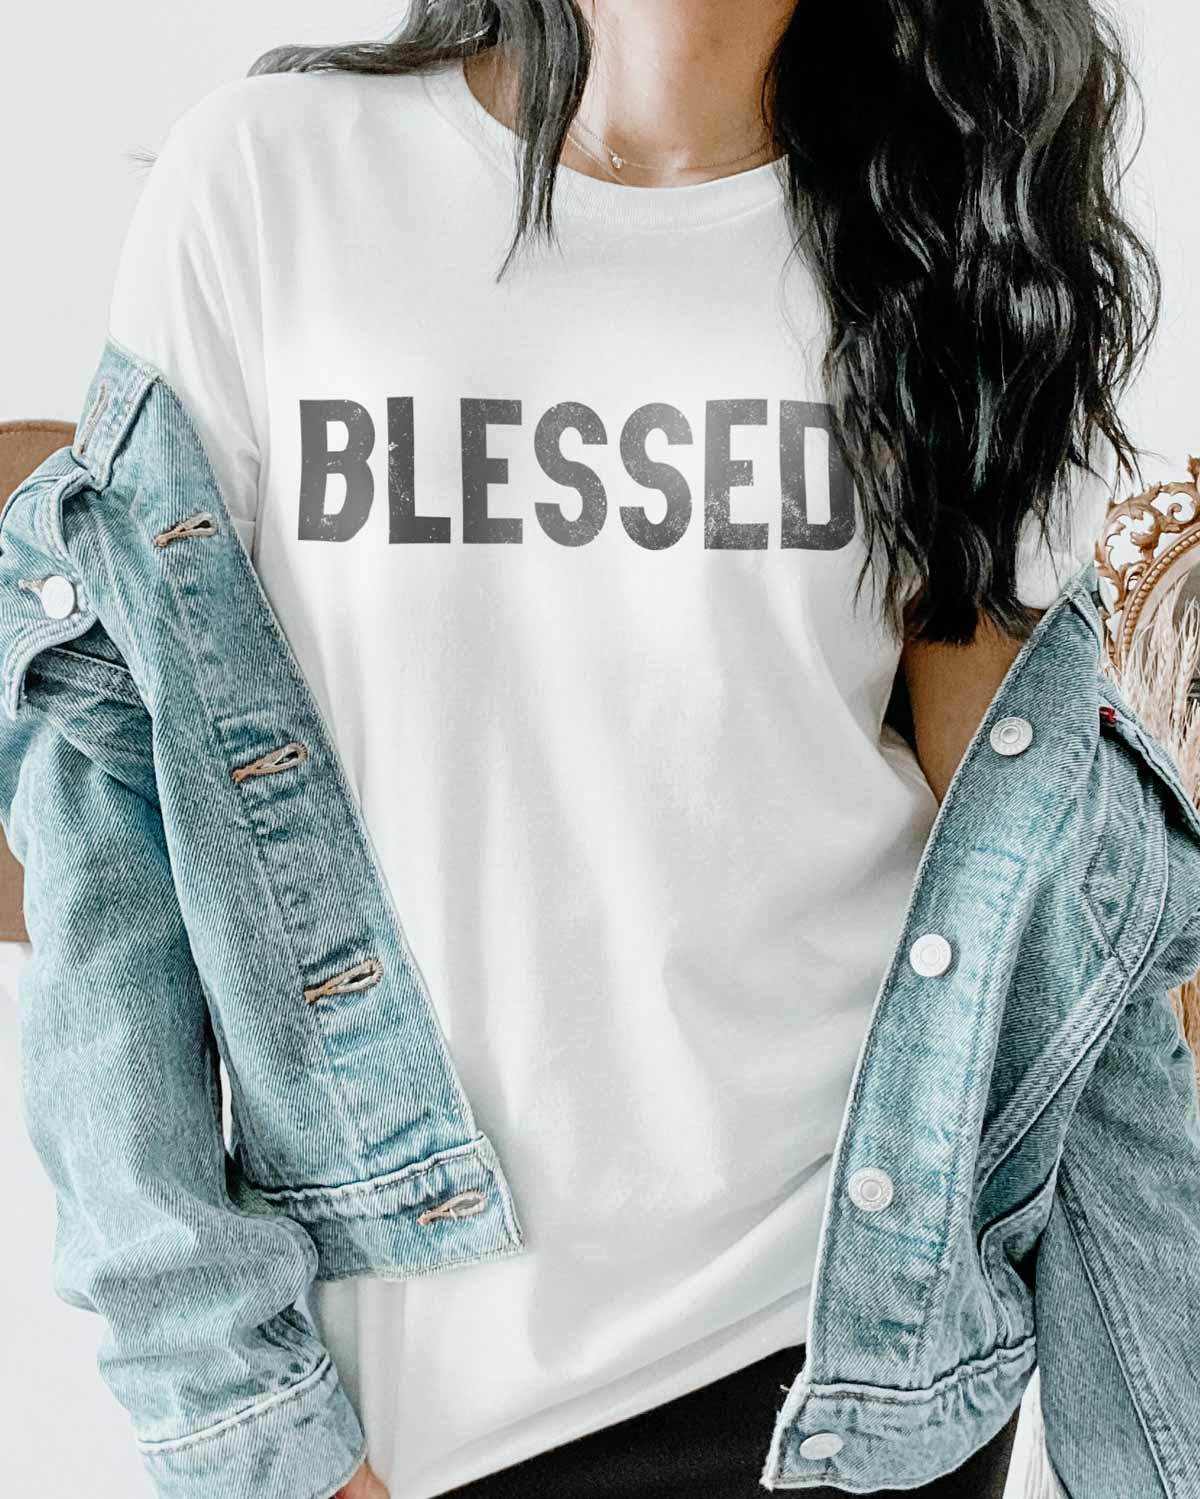 Blessed Bold Graphic Tee